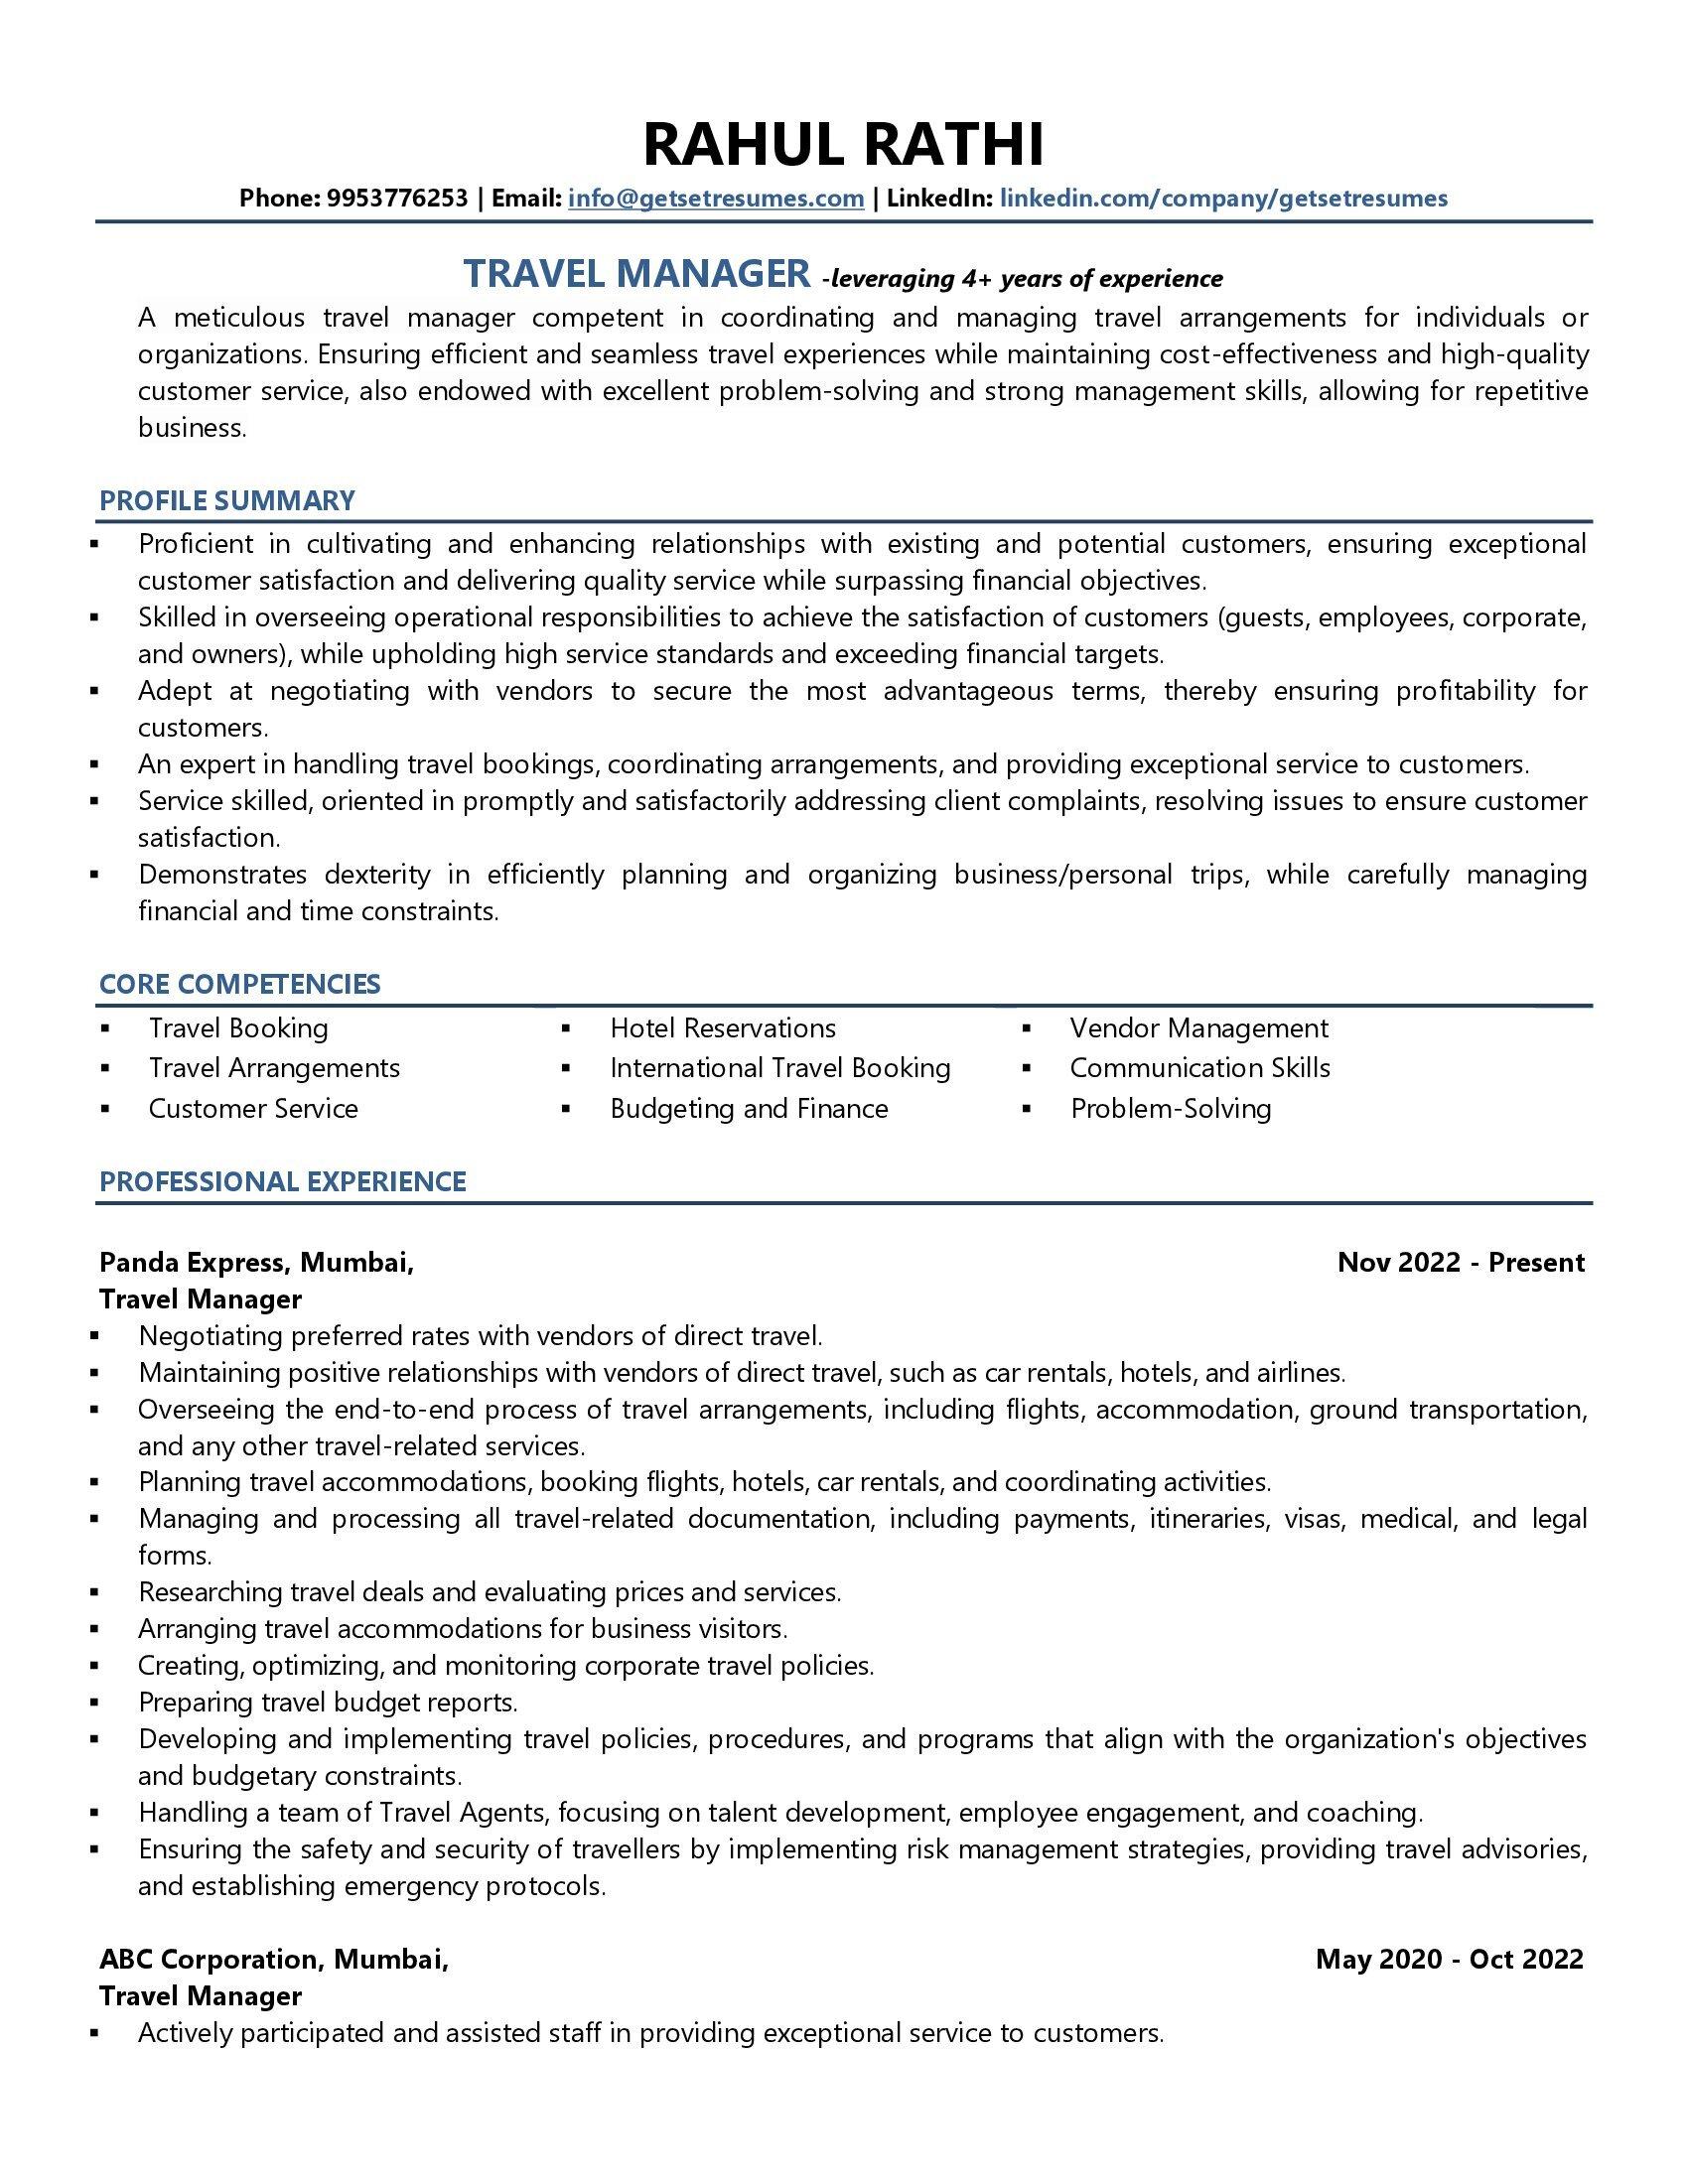 Travel Manager - Resume Example & Template